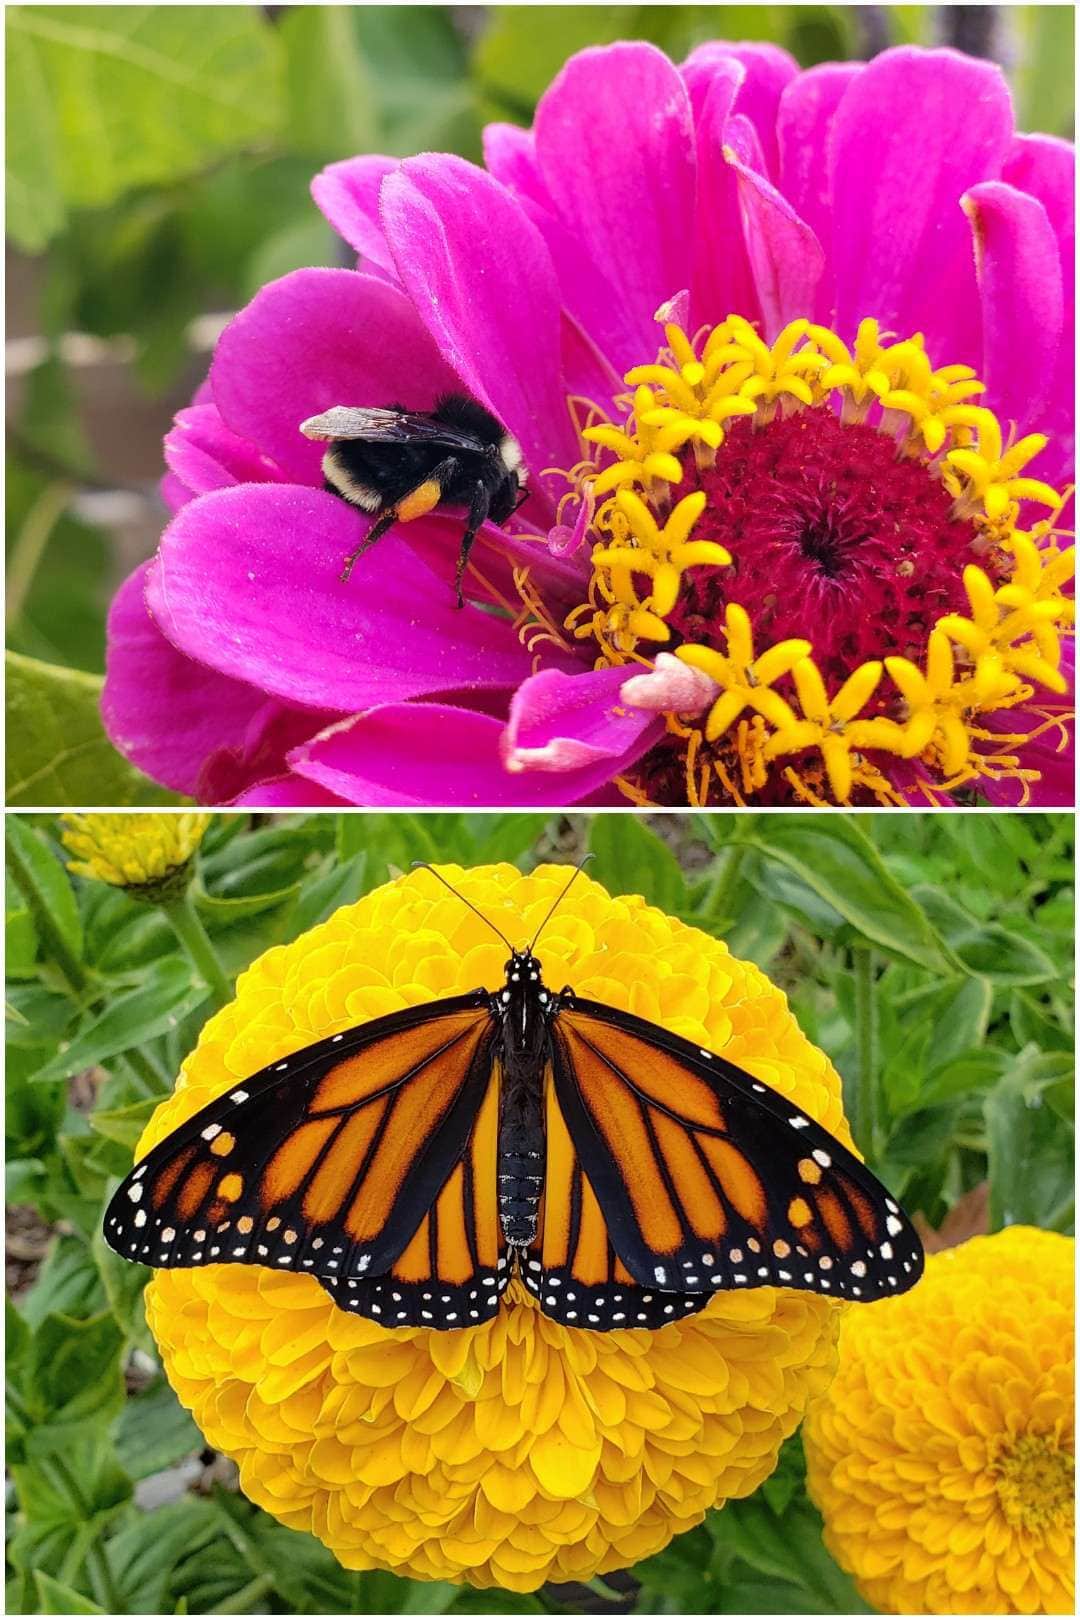 Two close up images of zinnia flowers. One is a large yellow flower with full petals, and a monarch butterfly resting in the middle with it's orange, black and white wings open. The other image is a close up of a pink zinnia flower with a bumble bee resting on the petals near the middle, with pollen on the flower and its legs.